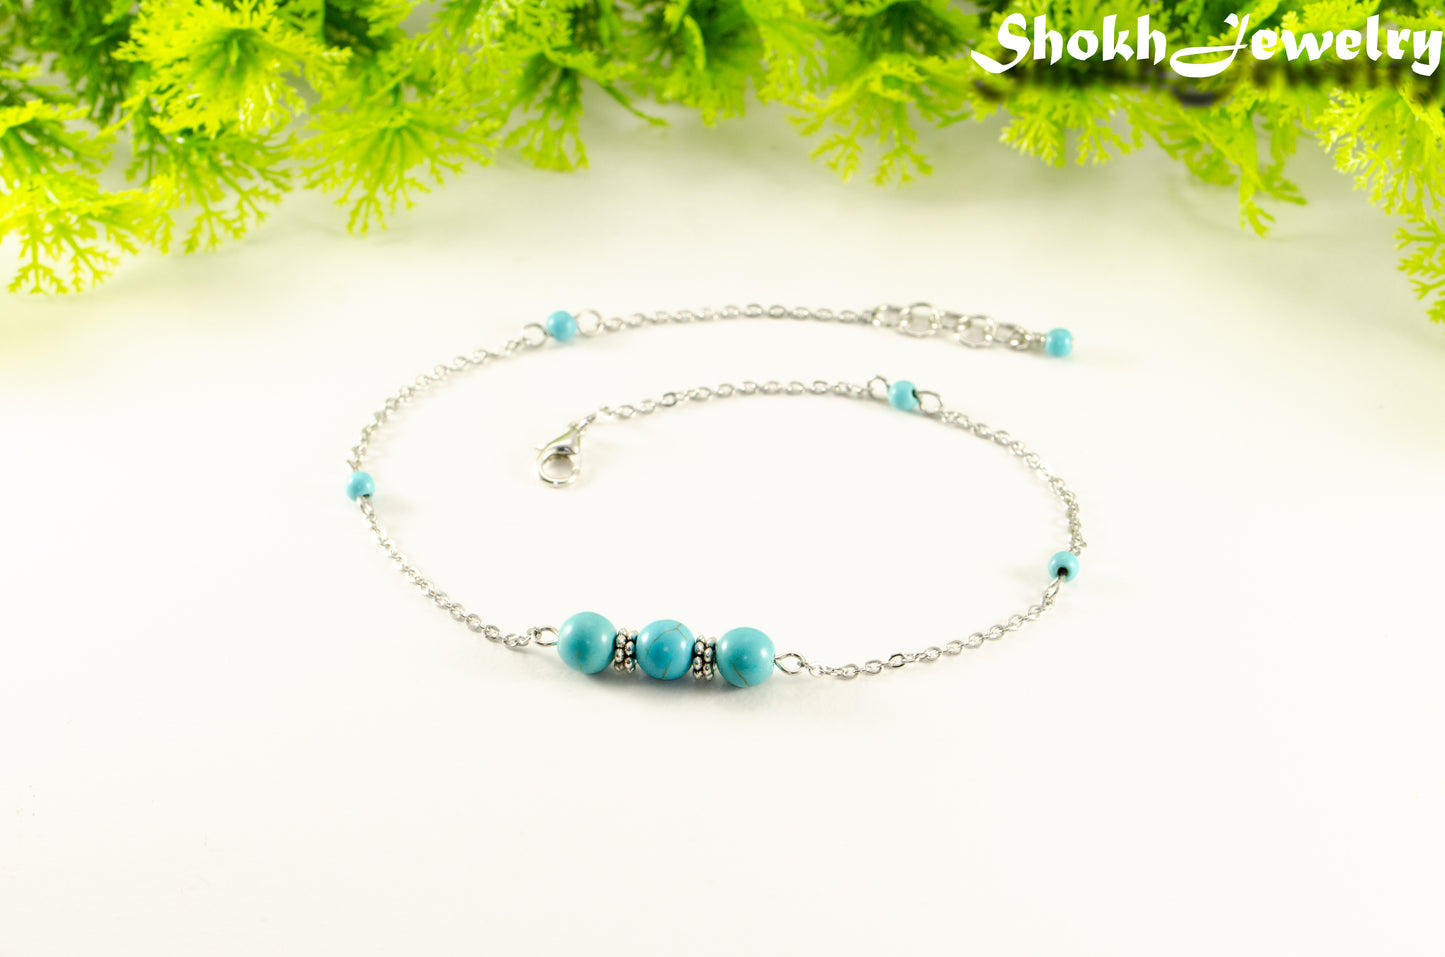 Natural Turquoise Howlite and Chain Choker Necklace for women.